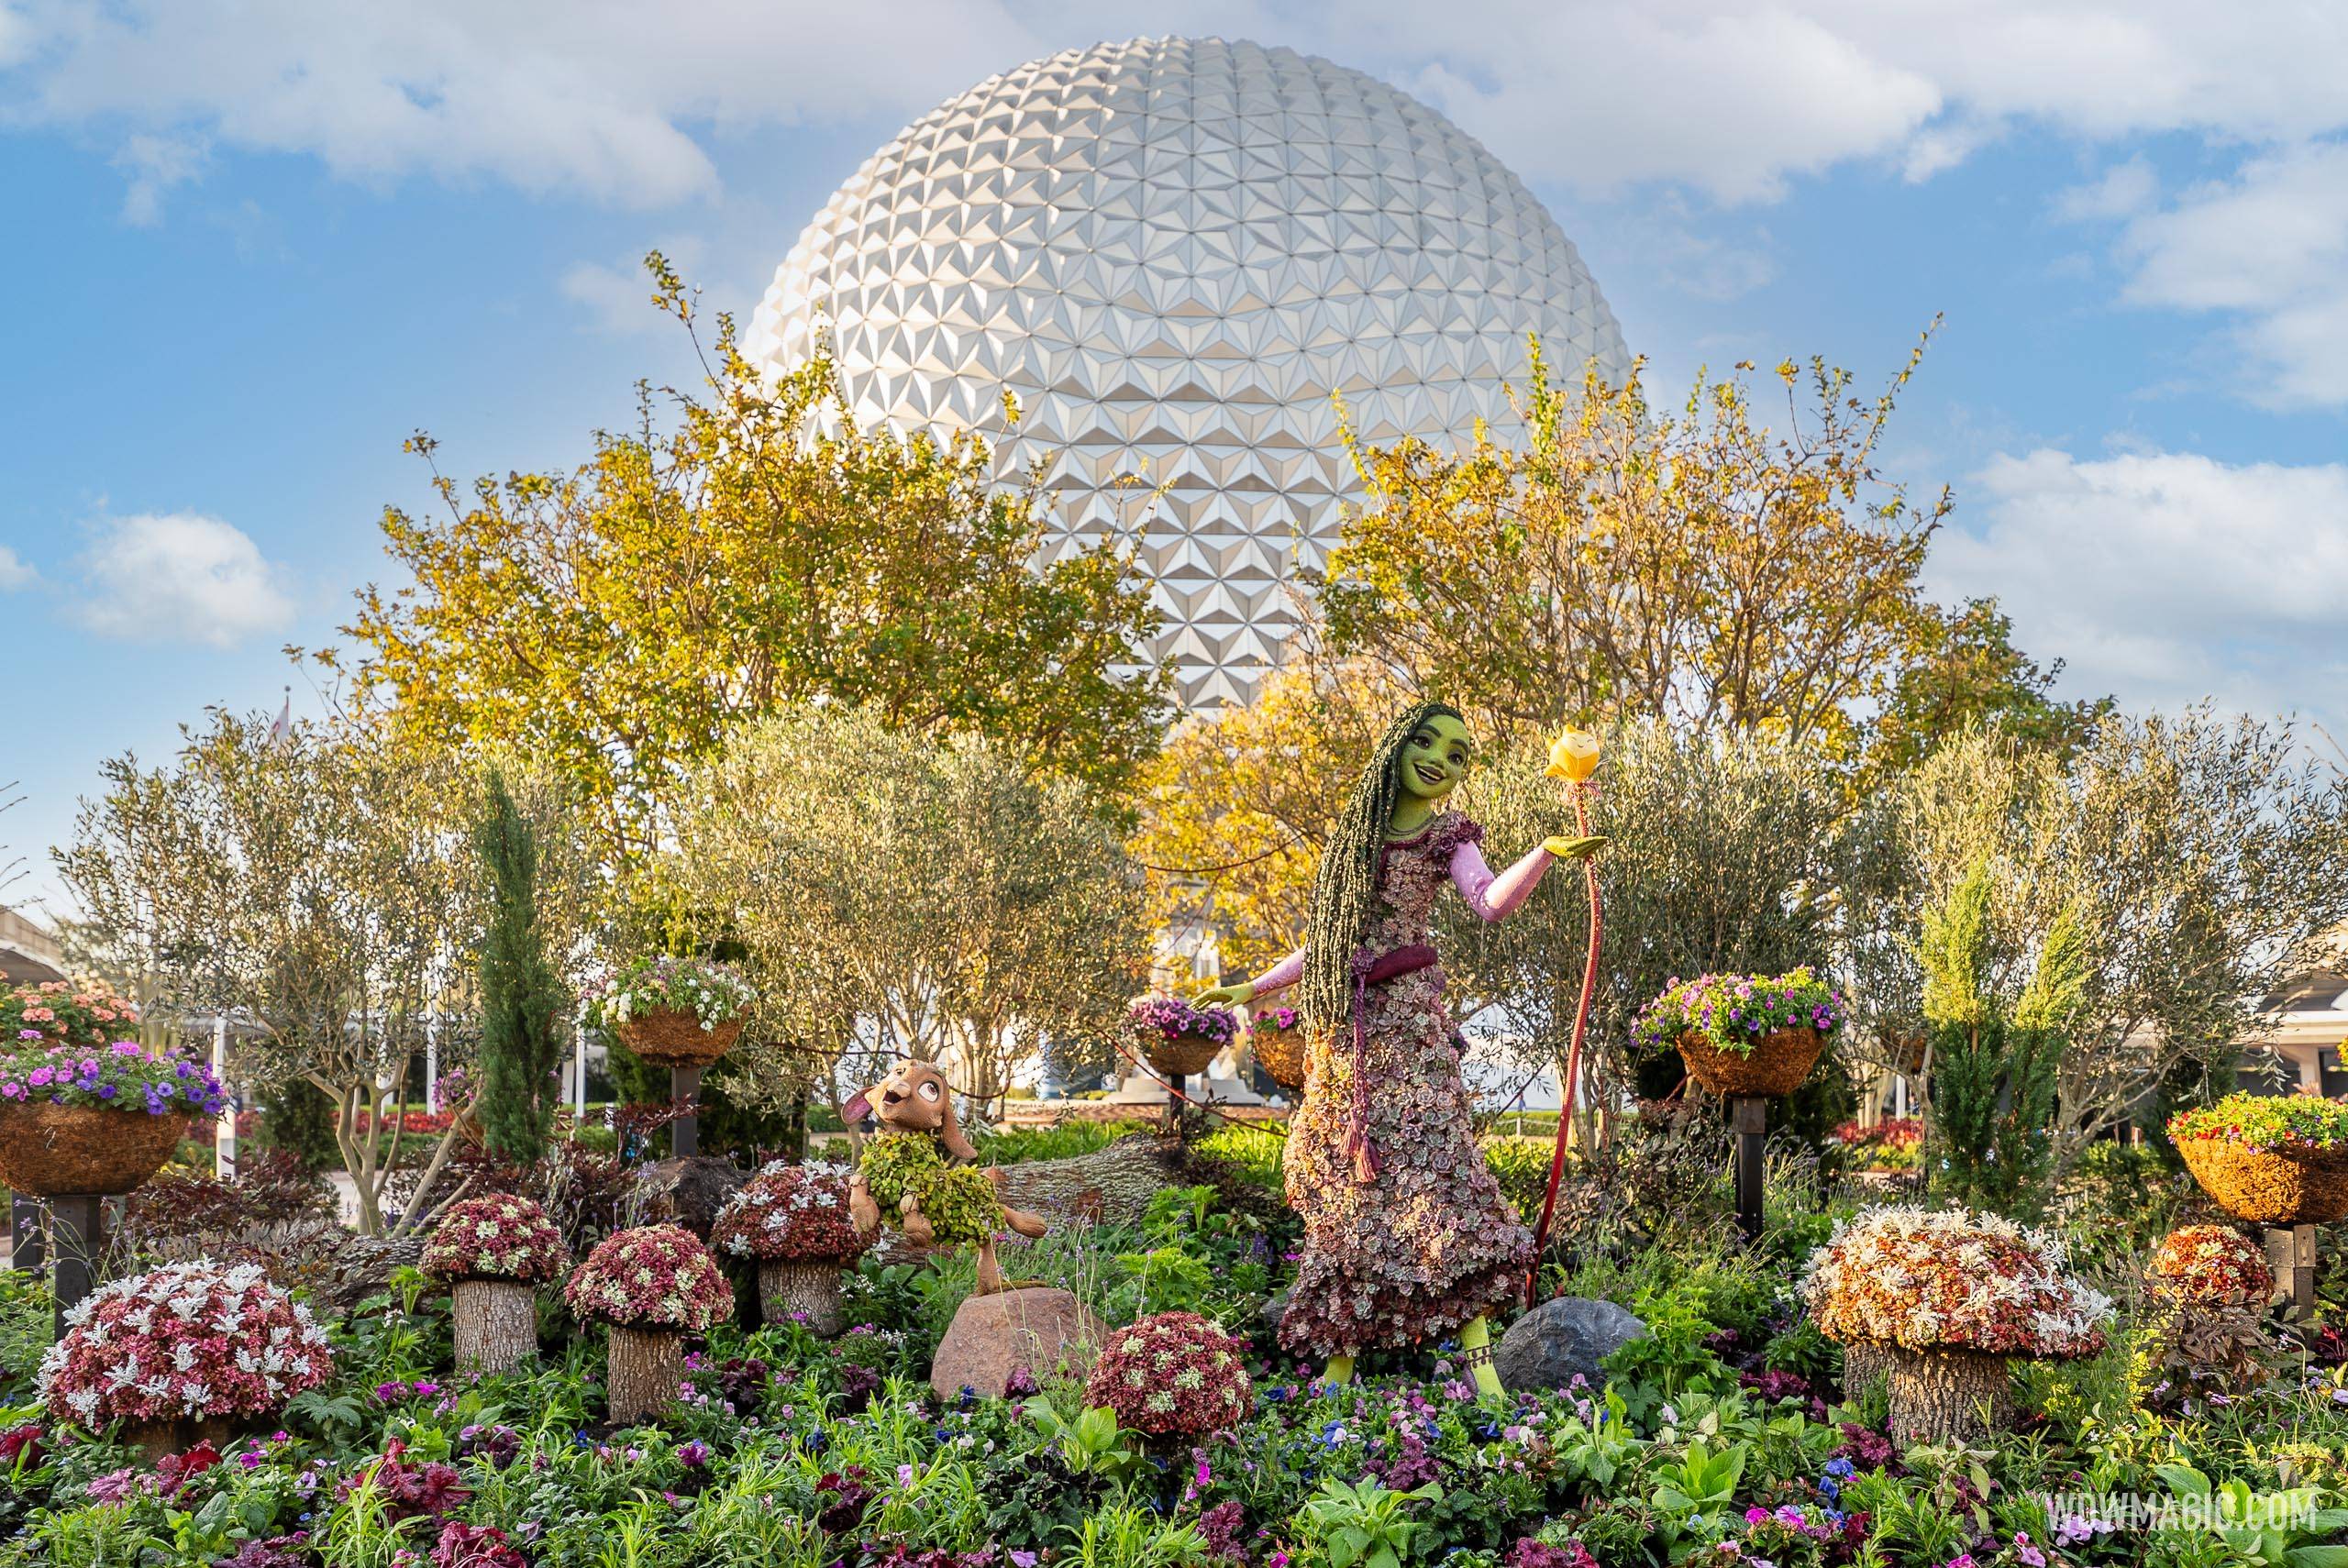 Characters of Toy Story 3 to headline the 2011 Epcot International Flower and Garden Festival